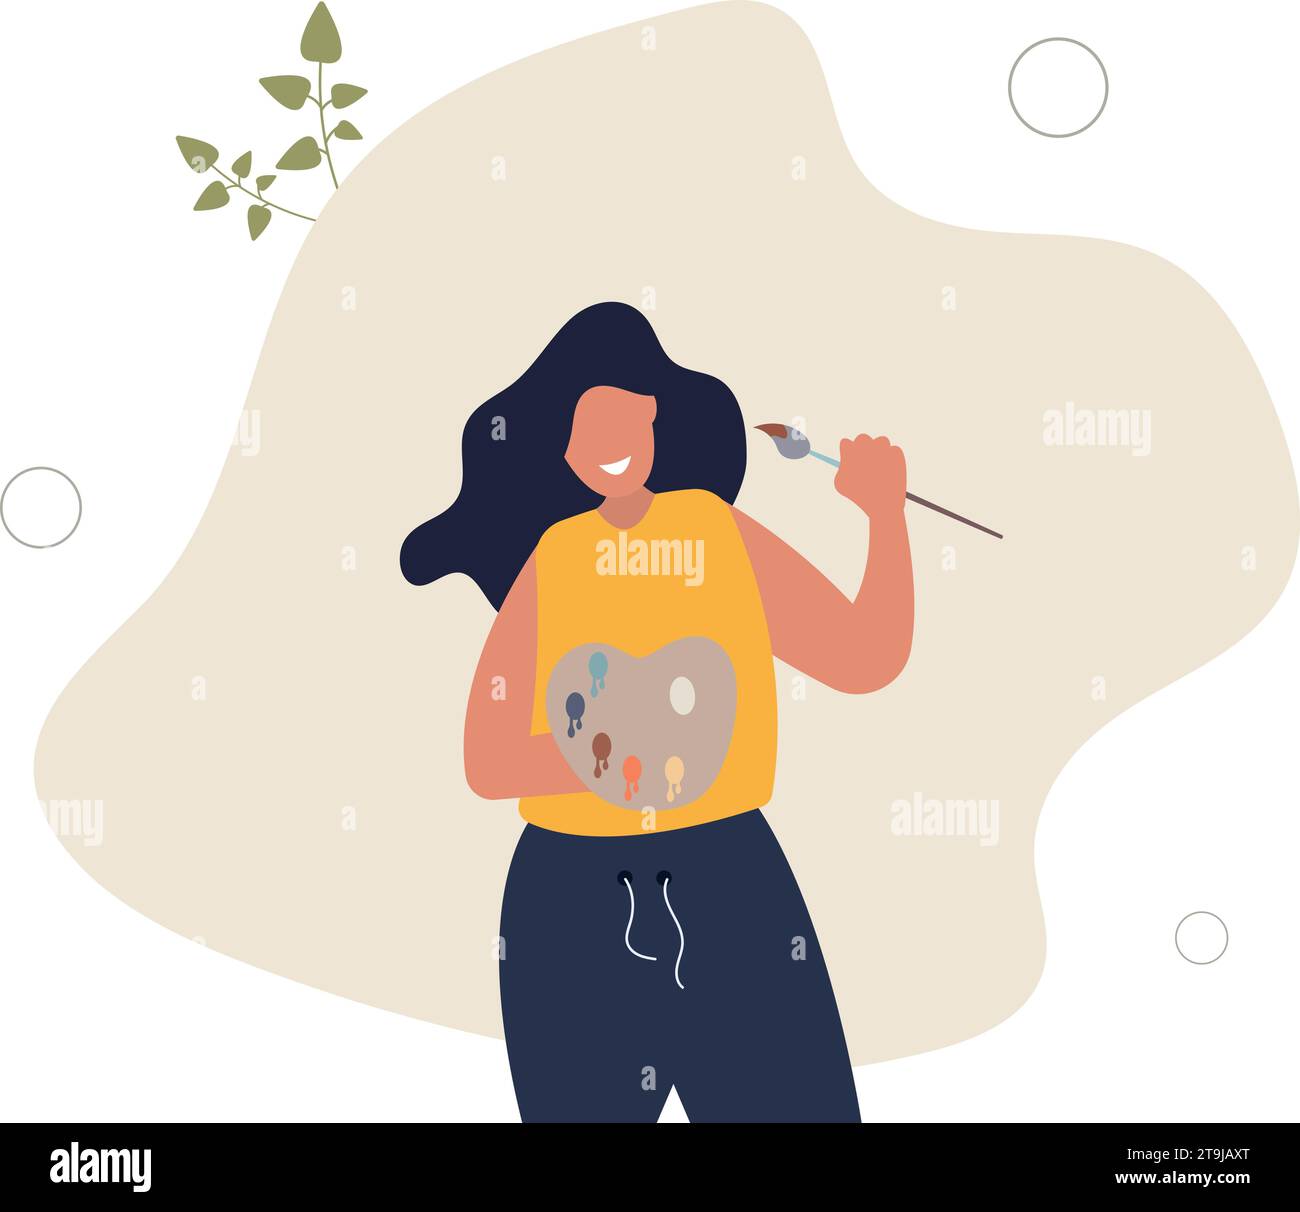 People hobbies and favorite activities.young woman artist with paints.flat vector illustration. Stock Vector